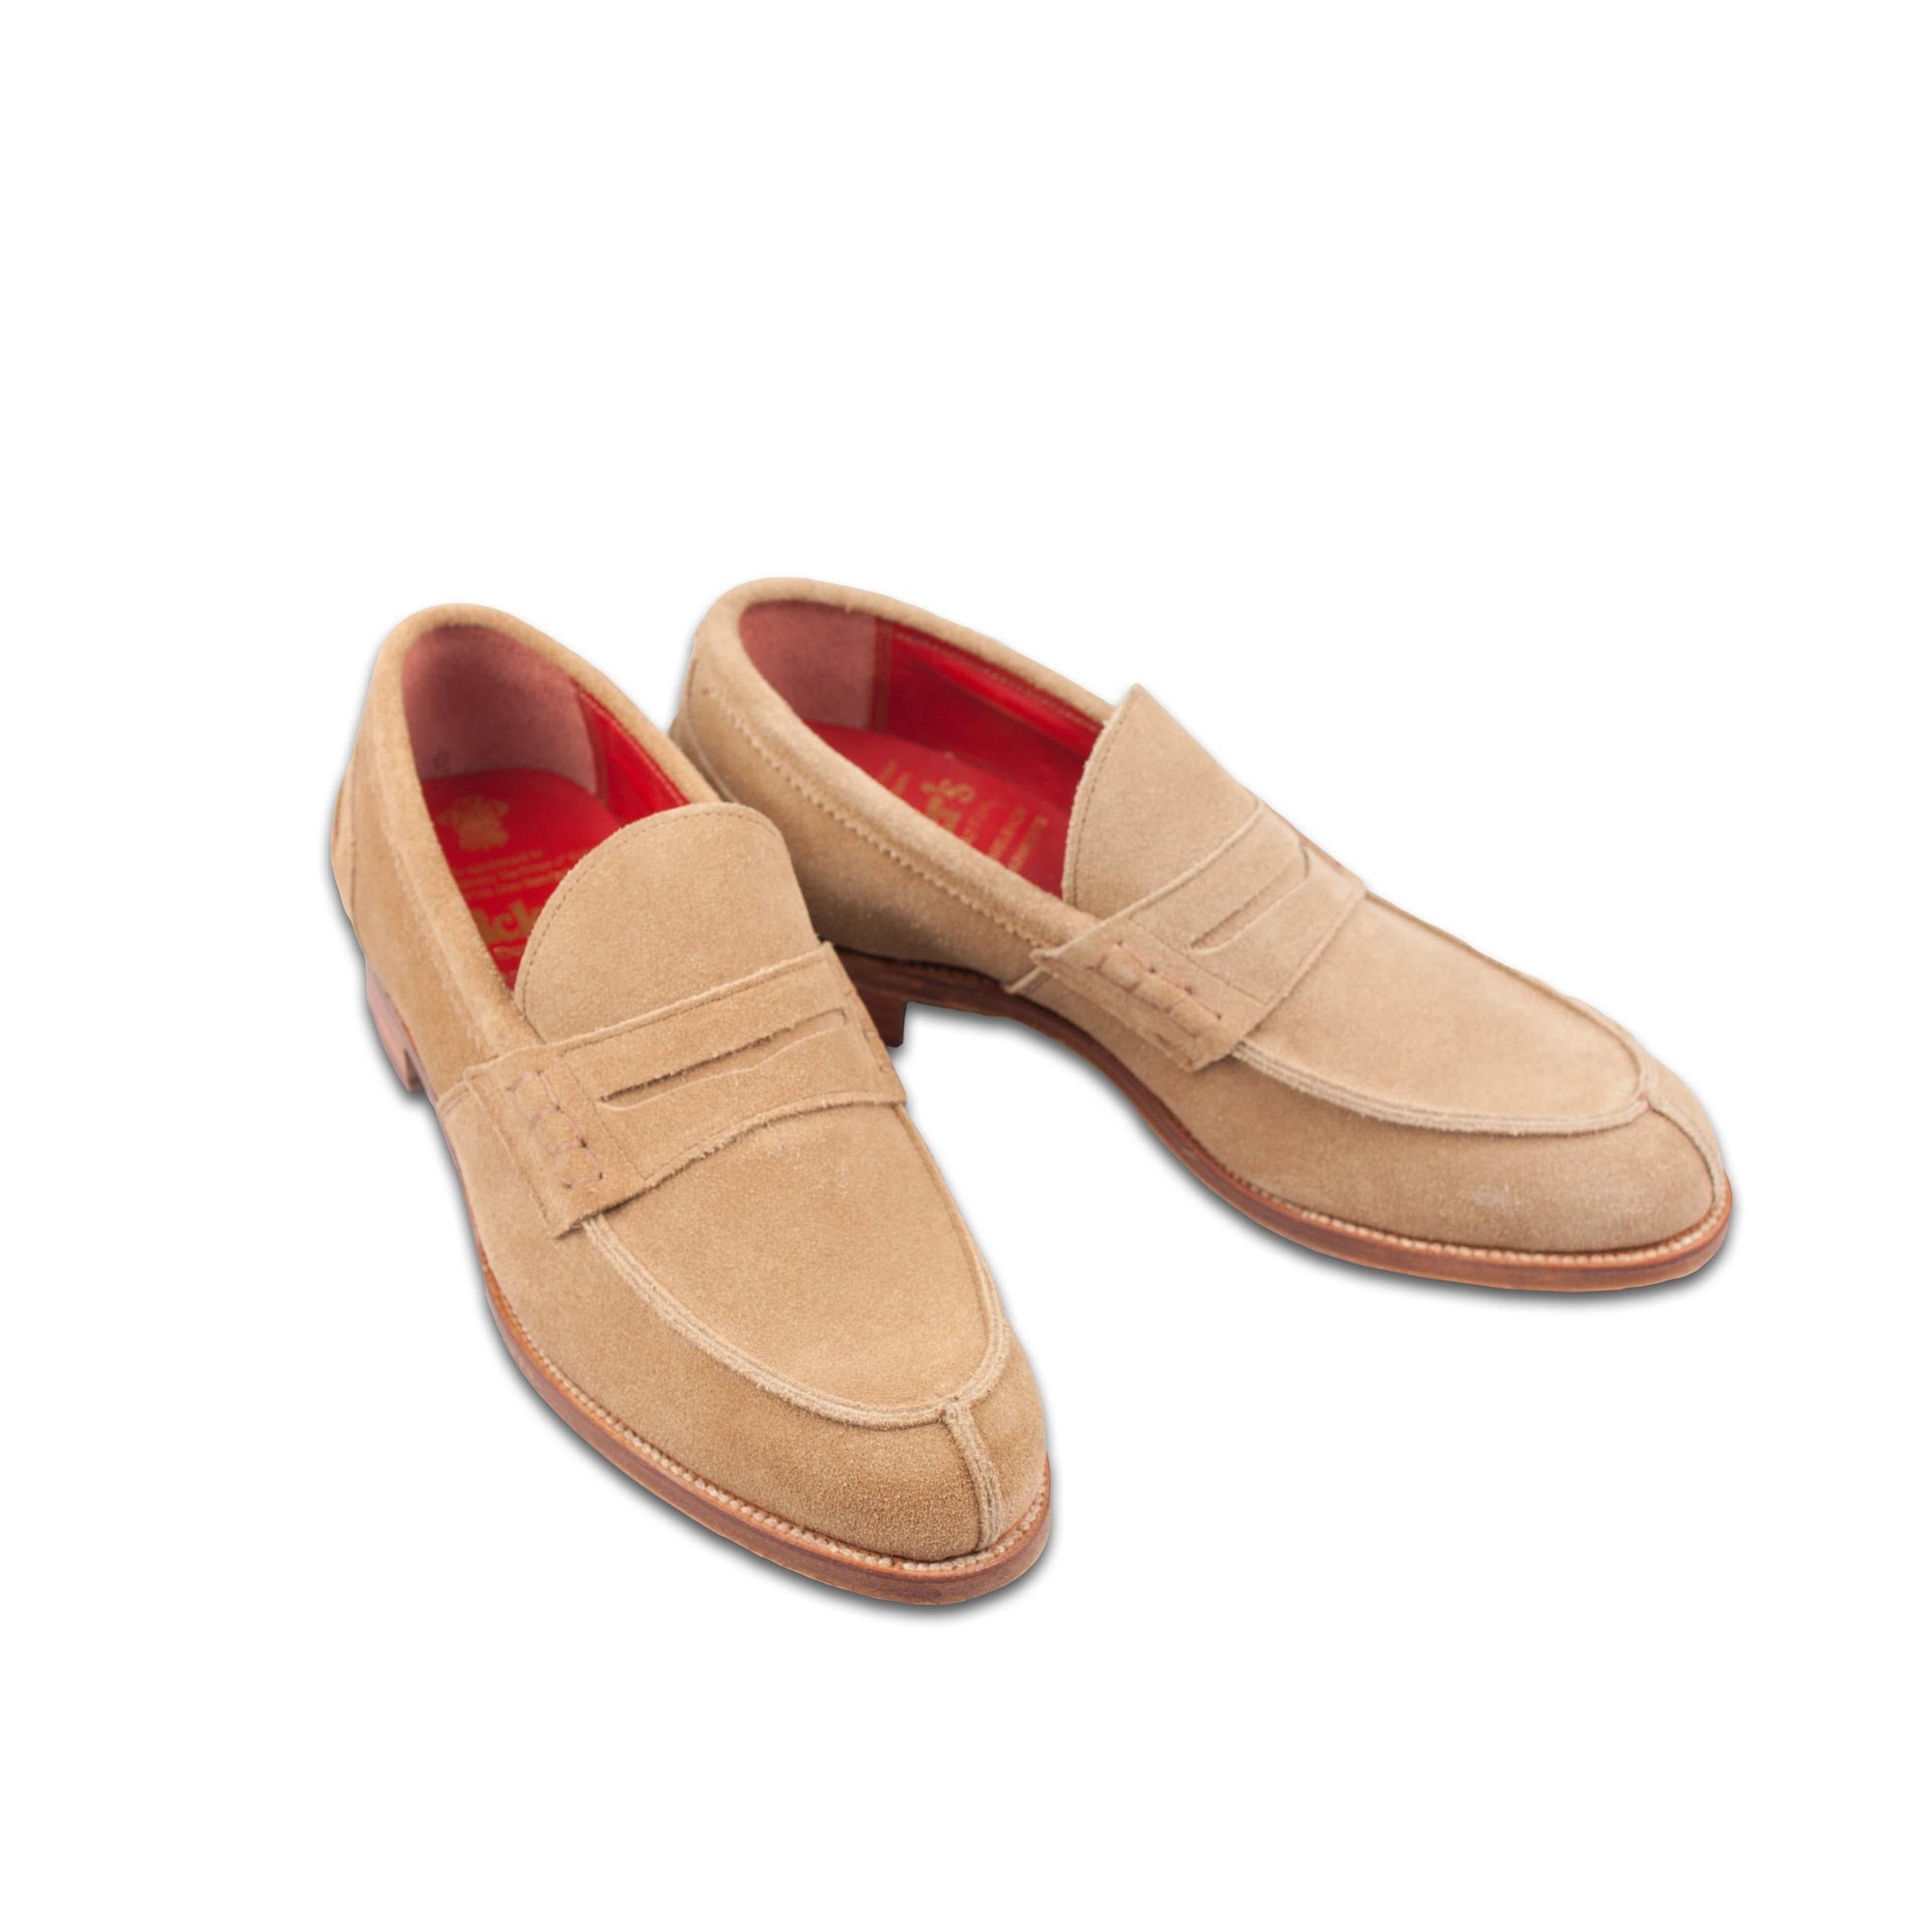 Loafer-Tricker's-Conrad Hasselbach Shoes & Garment